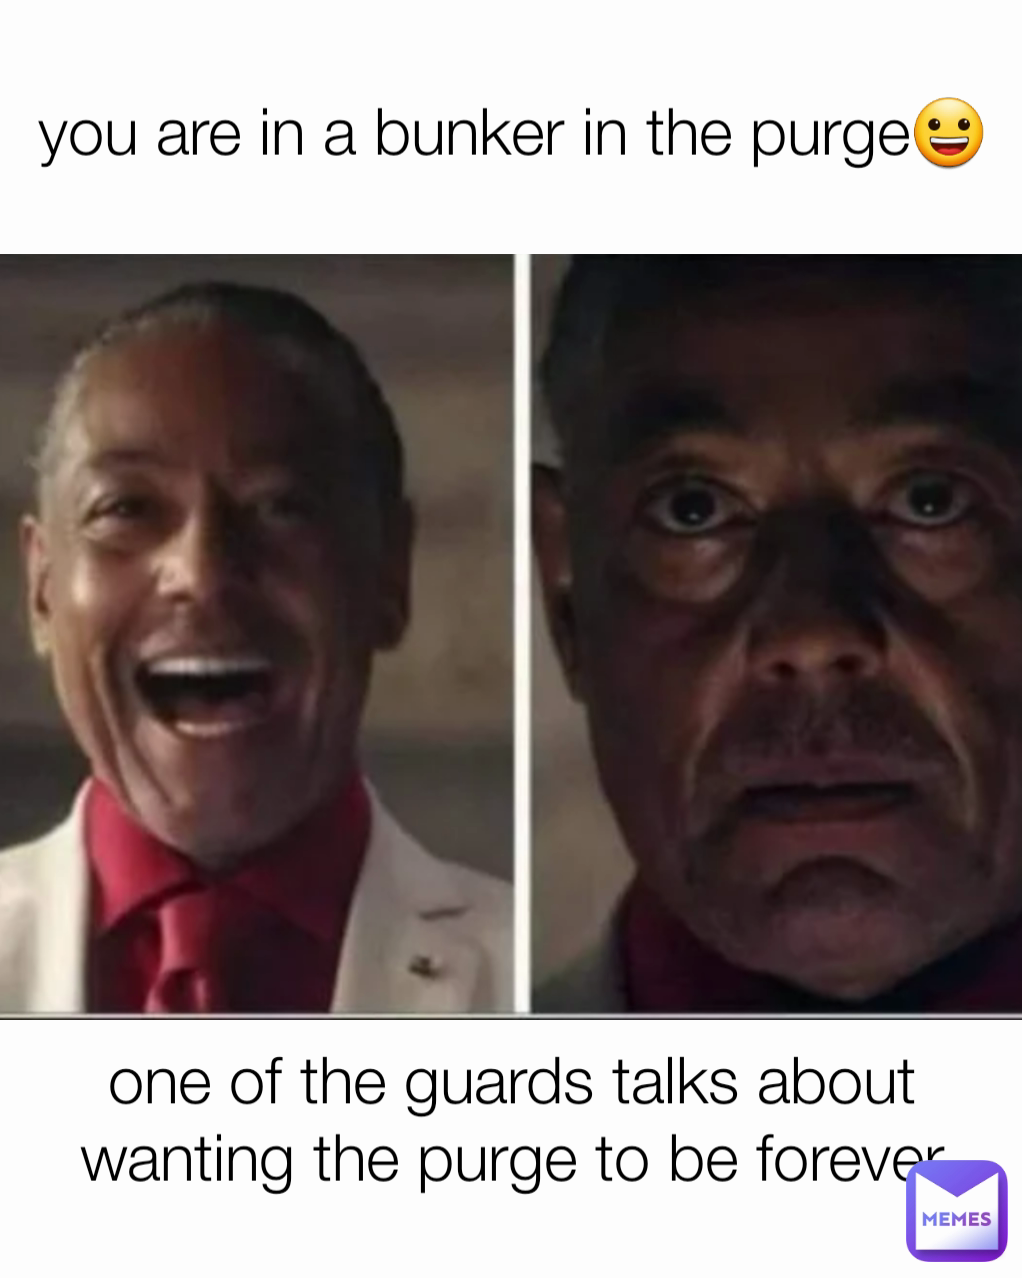 one of the guards talks about wanting the purge to be forever
 you are in a bunker in the purge😀